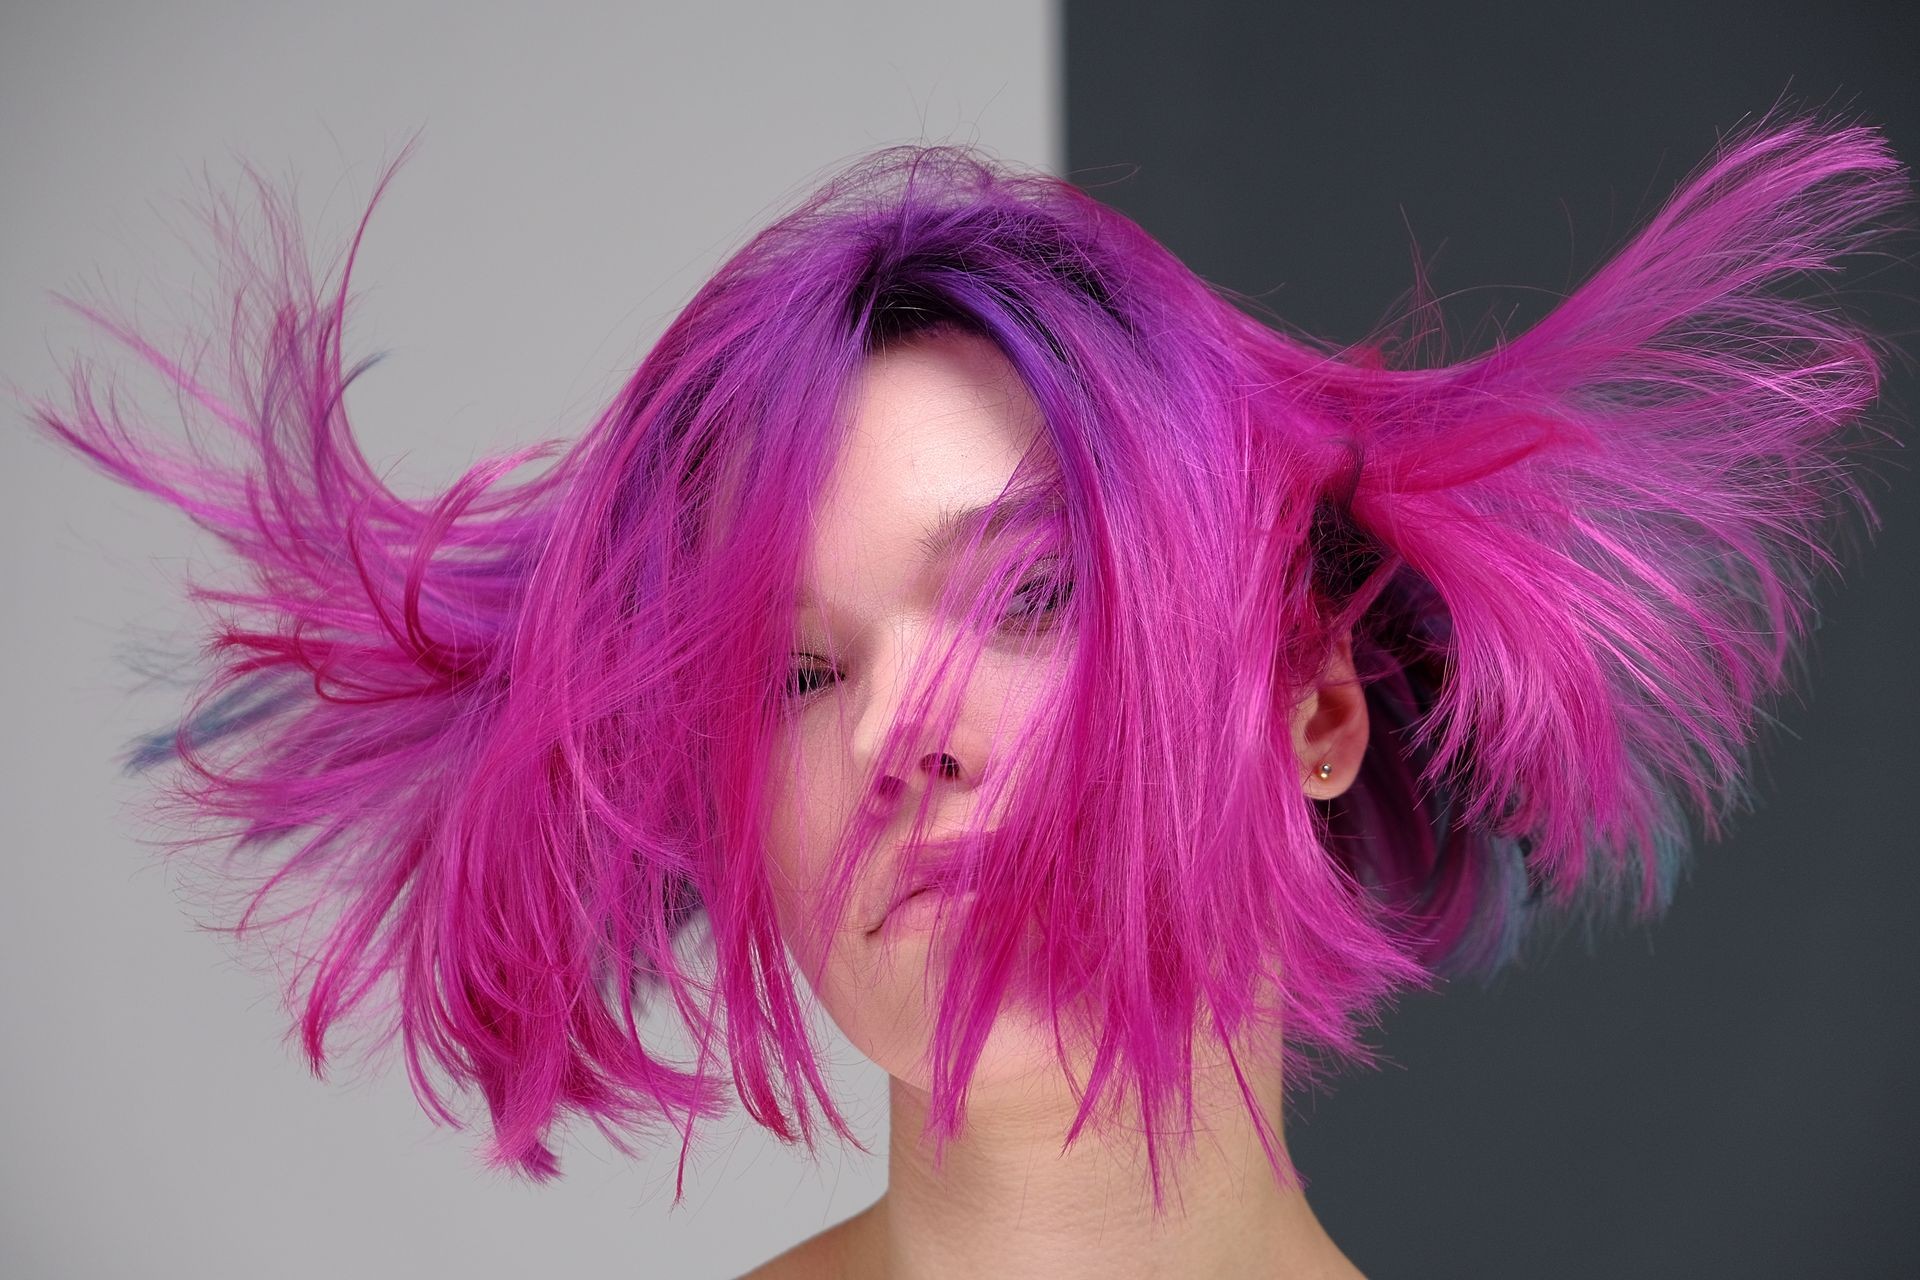 Concept Portrait of a punk girl, young woman with chic purple hair color in studio close up on a colorful background with fluttering hair. Short hairstyle, fashion haircut.